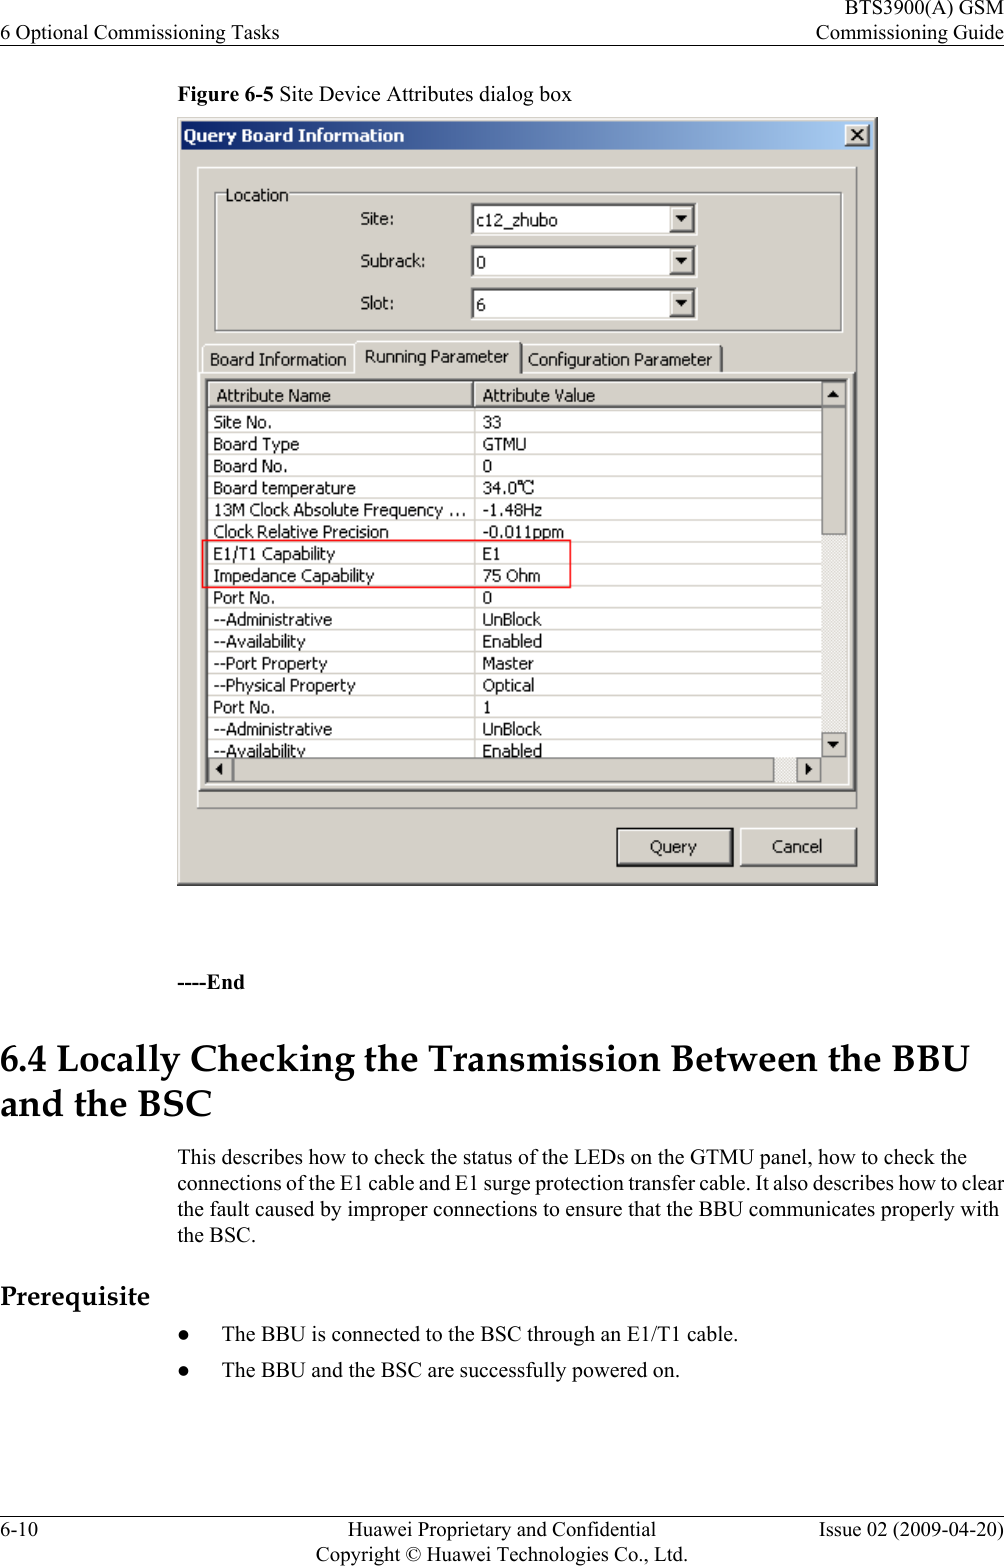 Figure 6-5 Site Device Attributes dialog box ----End6.4 Locally Checking the Transmission Between the BBUand the BSCThis describes how to check the status of the LEDs on the GTMU panel, how to check theconnections of the E1 cable and E1 surge protection transfer cable. It also describes how to clearthe fault caused by improper connections to ensure that the BBU communicates properly withthe BSC.PrerequisitelThe BBU is connected to the BSC through an E1/T1 cable.lThe BBU and the BSC are successfully powered on.6 Optional Commissioning TasksBTS3900(A) GSMCommissioning Guide6-10 Huawei Proprietary and ConfidentialCopyright © Huawei Technologies Co., Ltd.Issue 02 (2009-04-20)